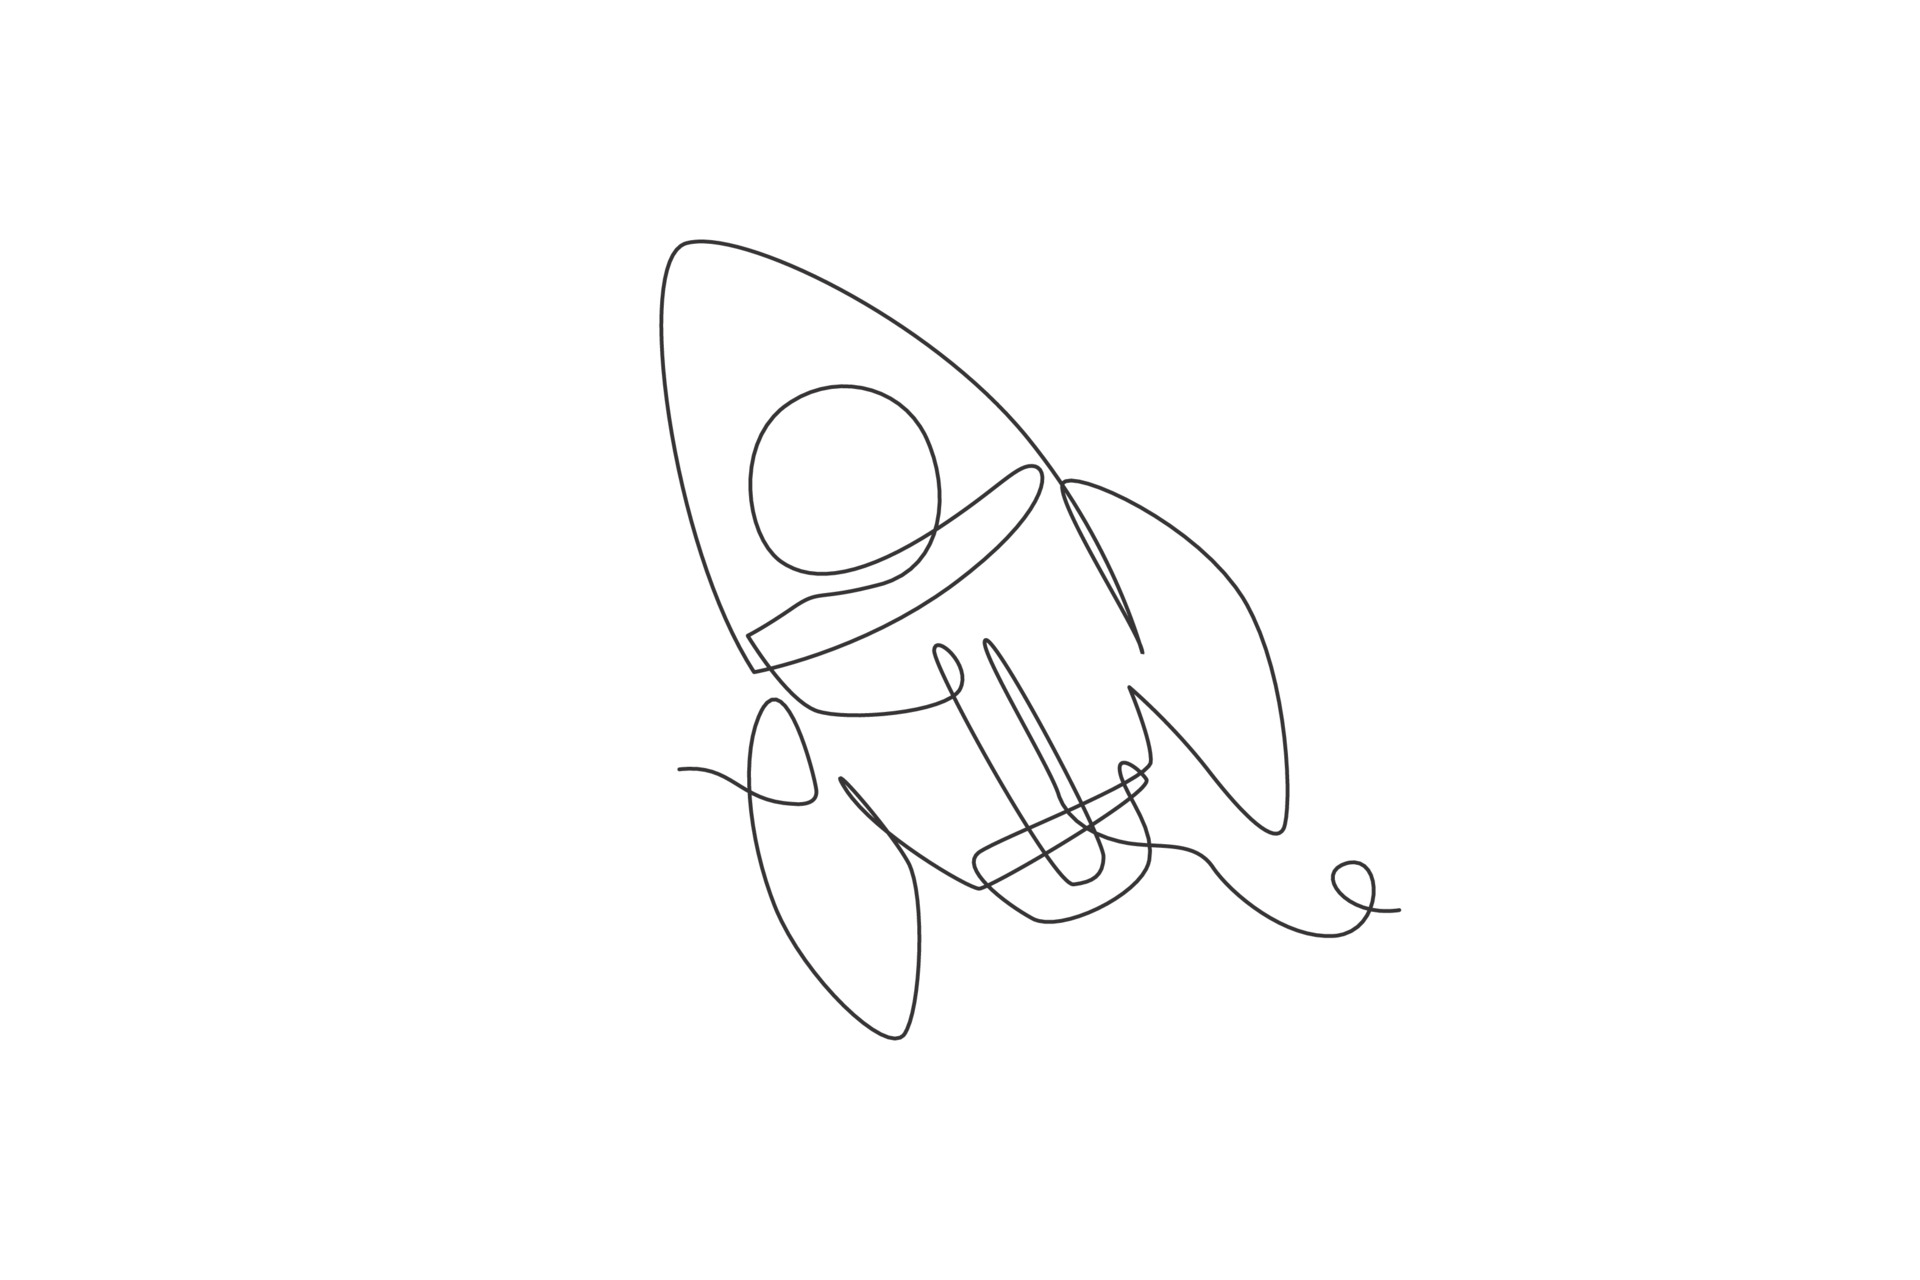  girl in space  easy drawing tutorial for beginners 𝕒 𝕖 𝕤 𝕥 𝕙 𝕖  𝕥 𝕚 𝕔   YouTube